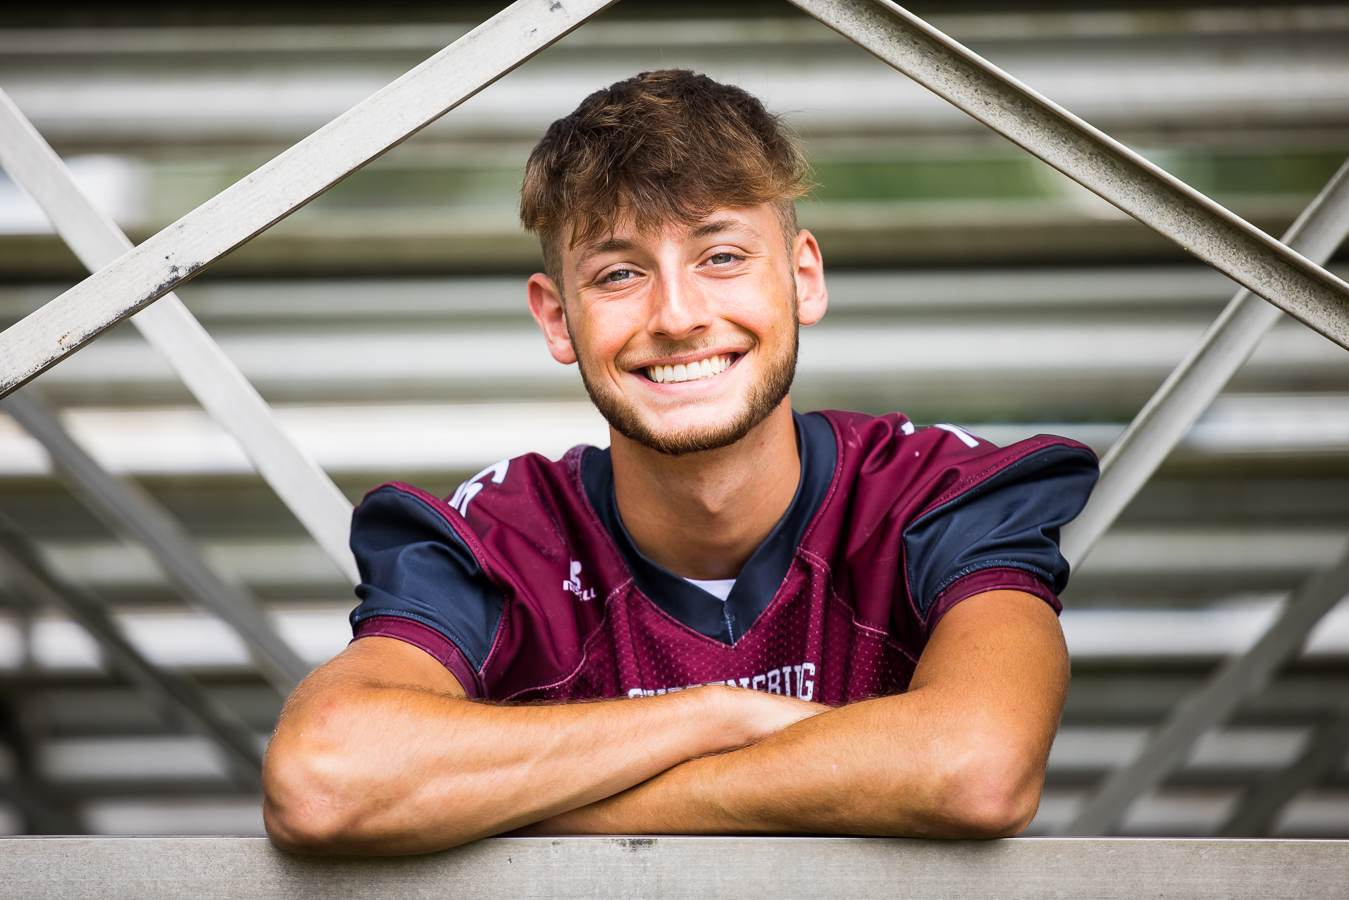 local shippensburg photographer, lisa rhinehart, captures this traditional image of this football player leaning on the bleachers smiling at the camera 